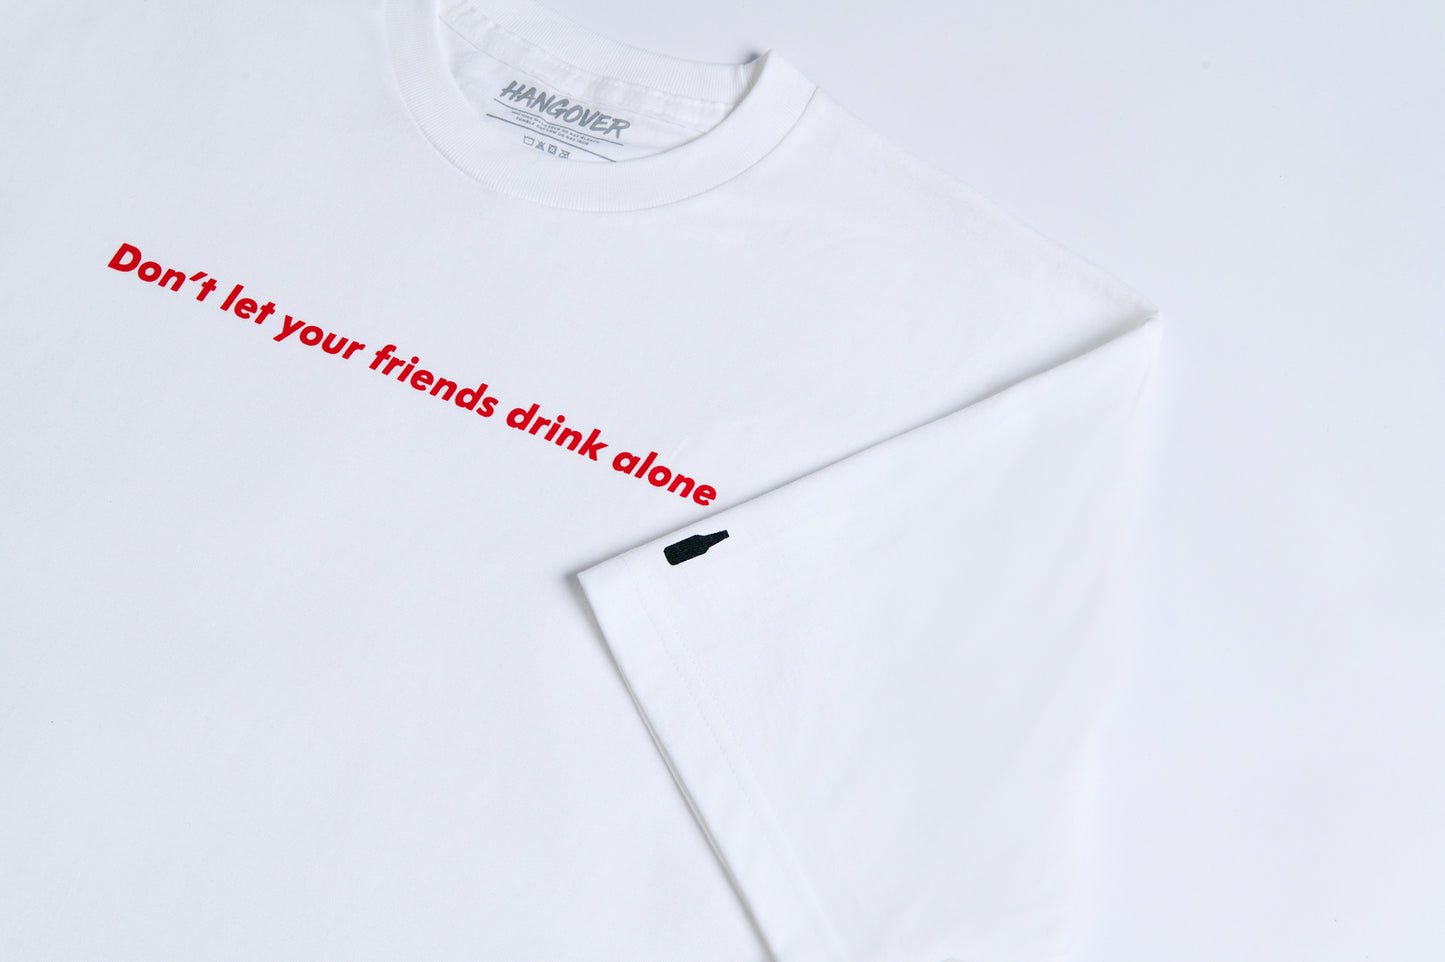 DON'T LET YOUR FRIENDS DRINK ALONE - WHITE